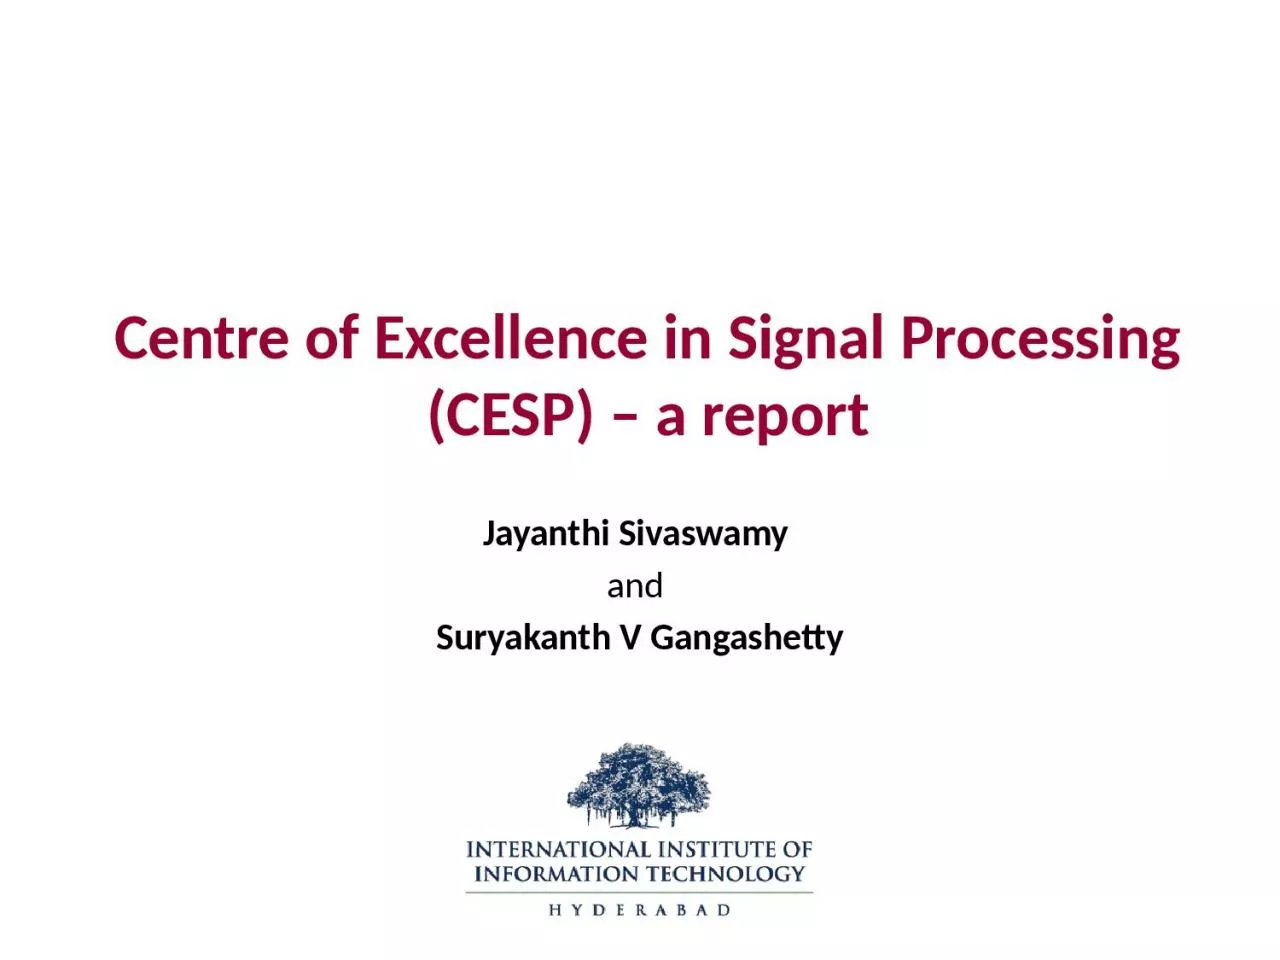 Centre of Excellence in Signal Processing (CESP) – a report